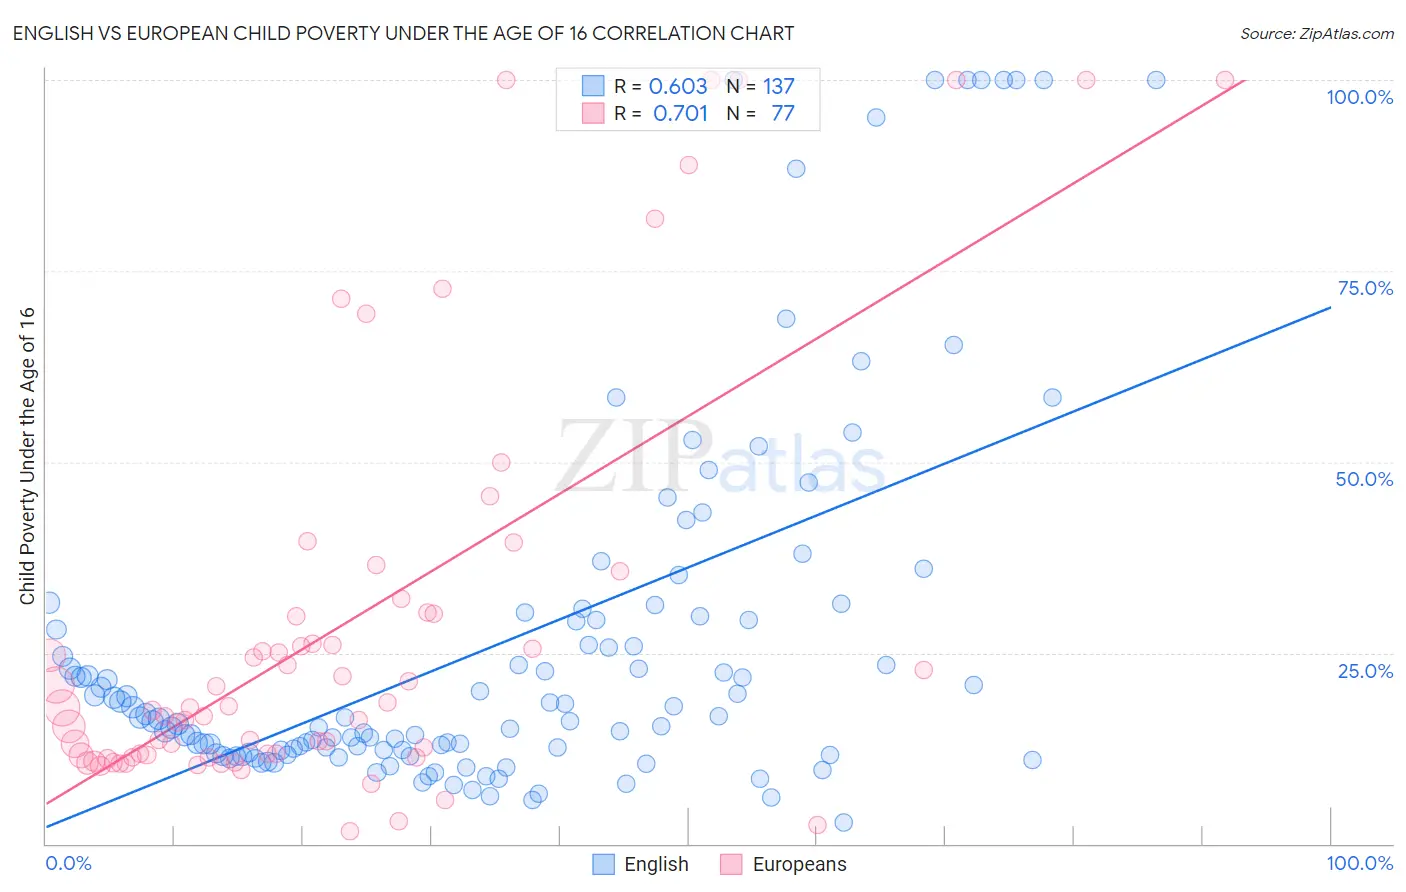 English vs European Child Poverty Under the Age of 16